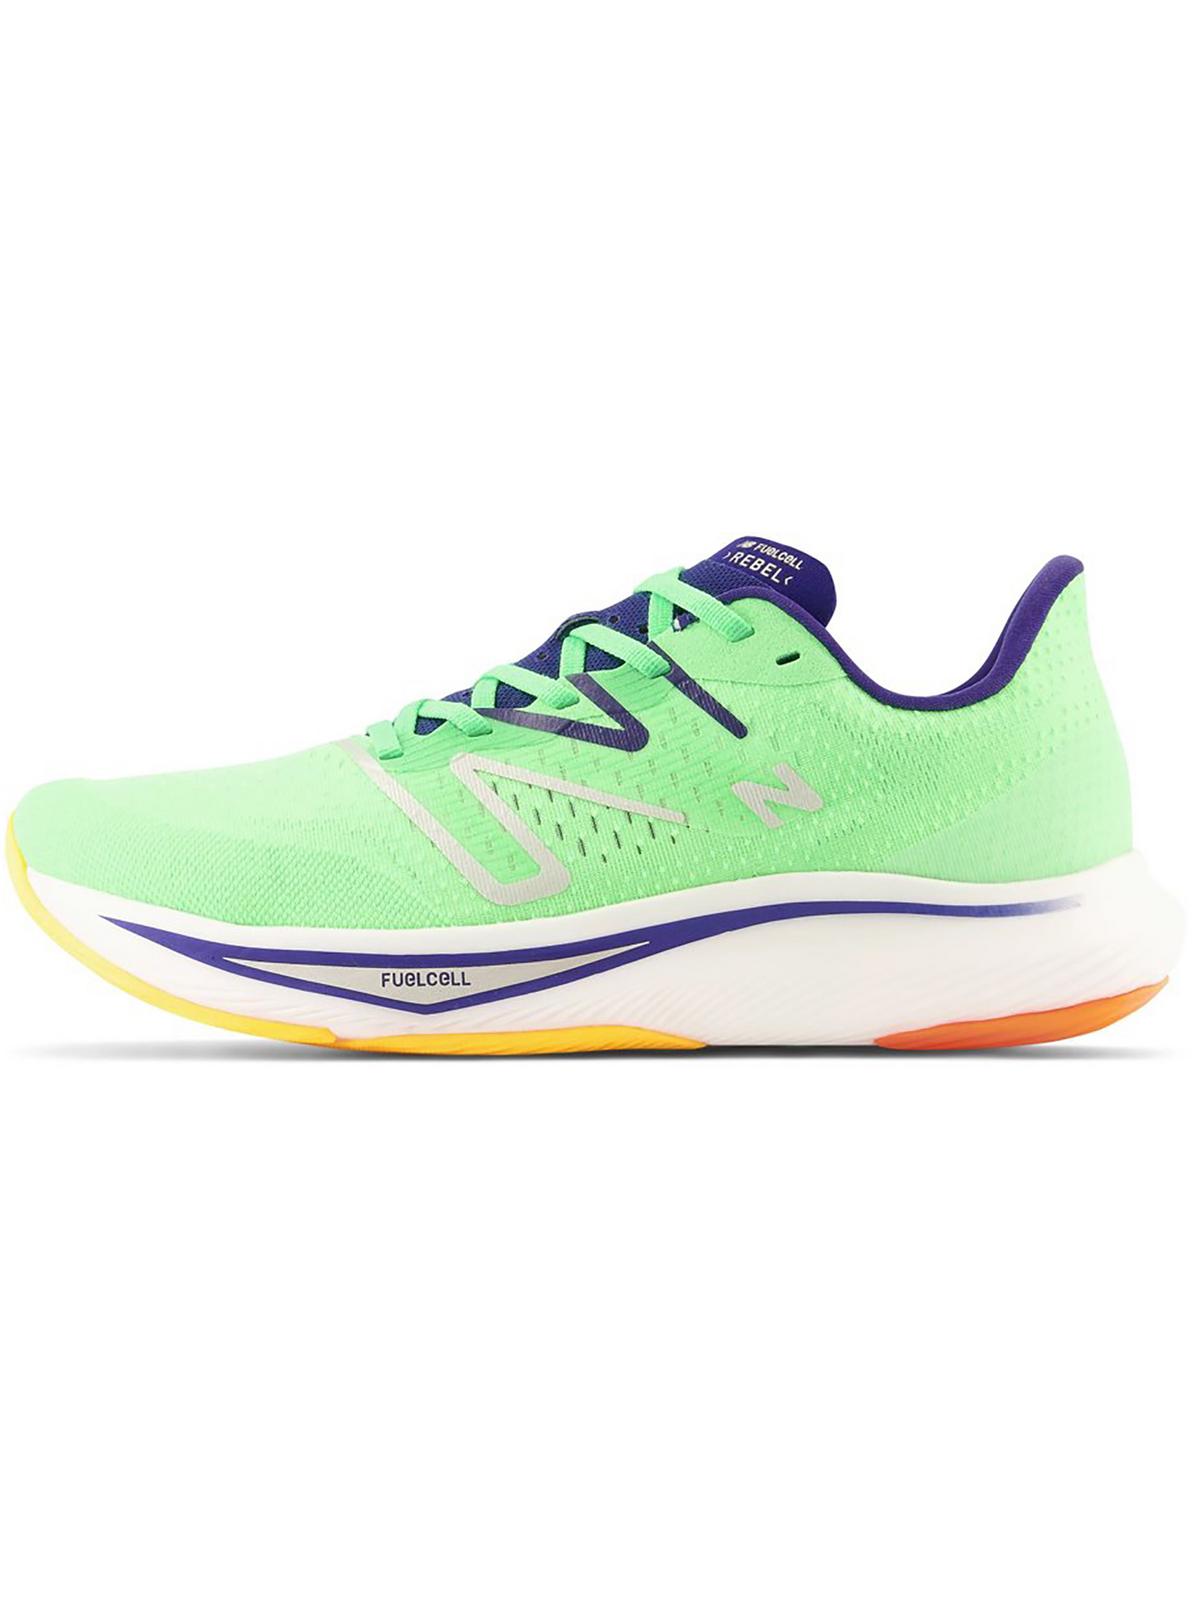 New Balance Mens FuelCell Rebel v3 Fitness Workout Running & Training ...